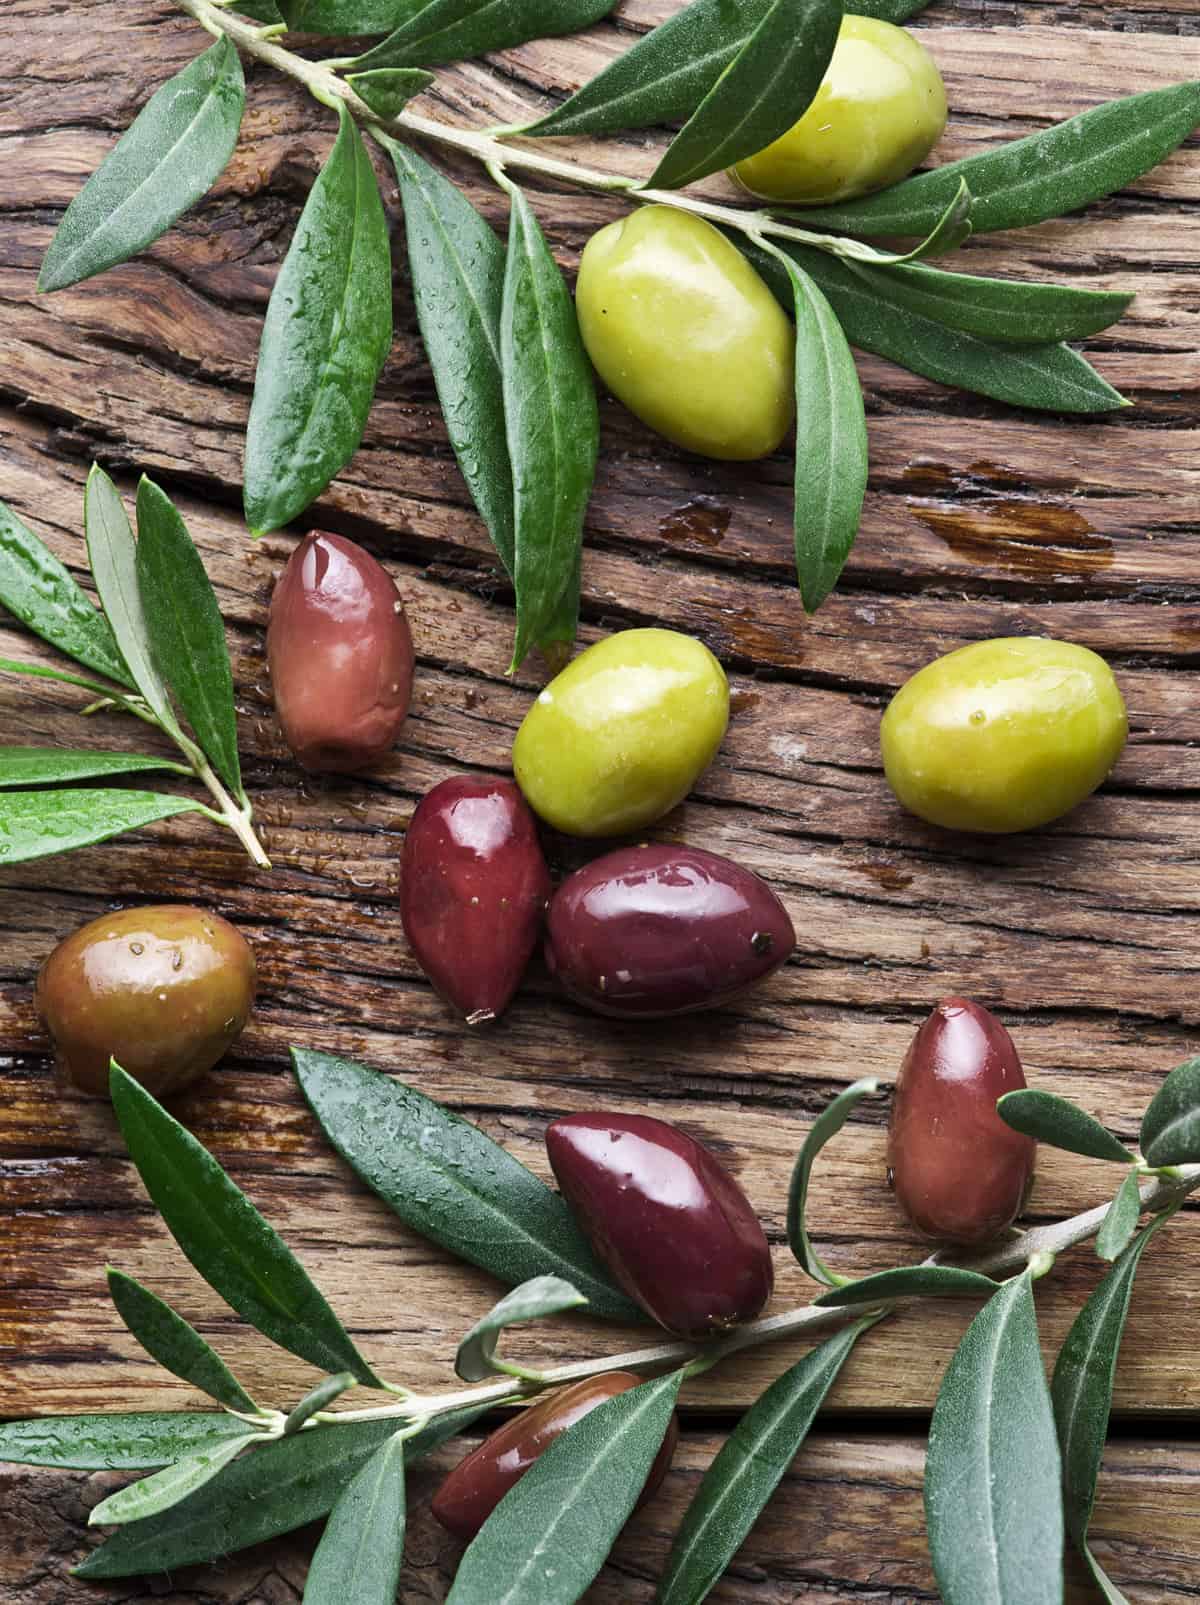 Ten olives of different colors and sizes with olive tree branches on a old wooden table.